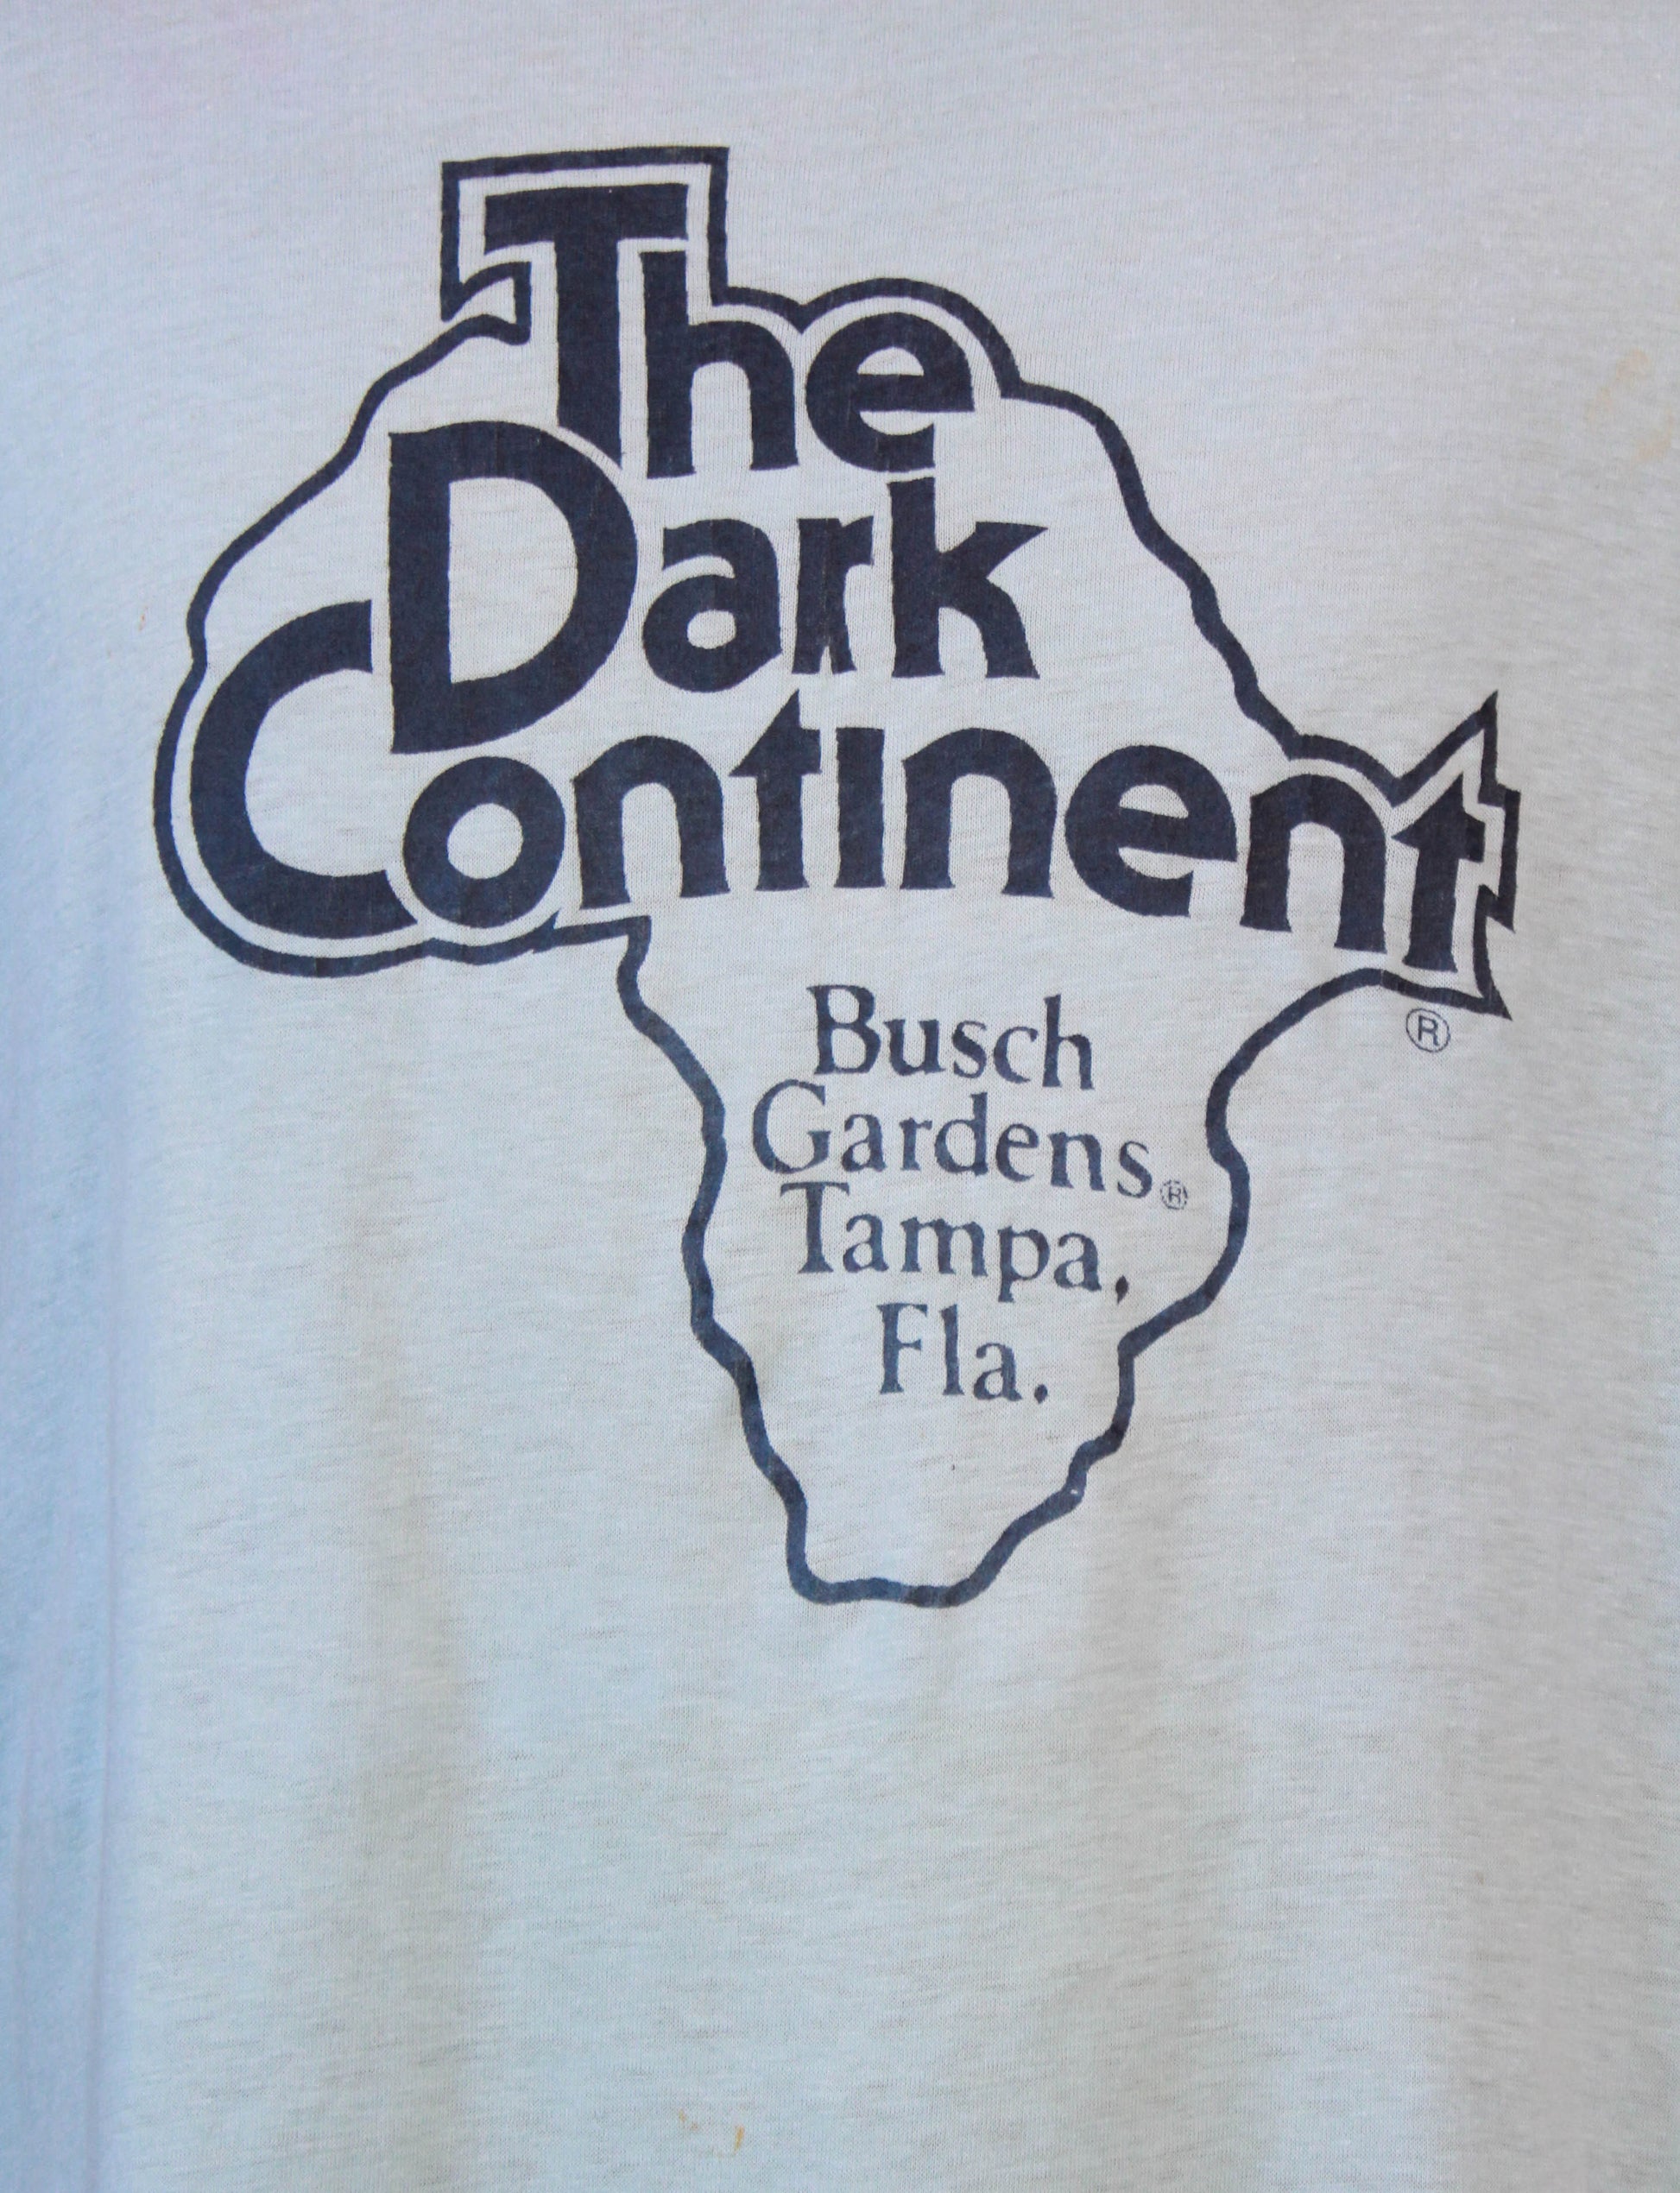 Vintage 80's Busch Gardens The Dark Continent Graphic T Shirt Tampa Florida Ringer Tee Blue Unisex Large